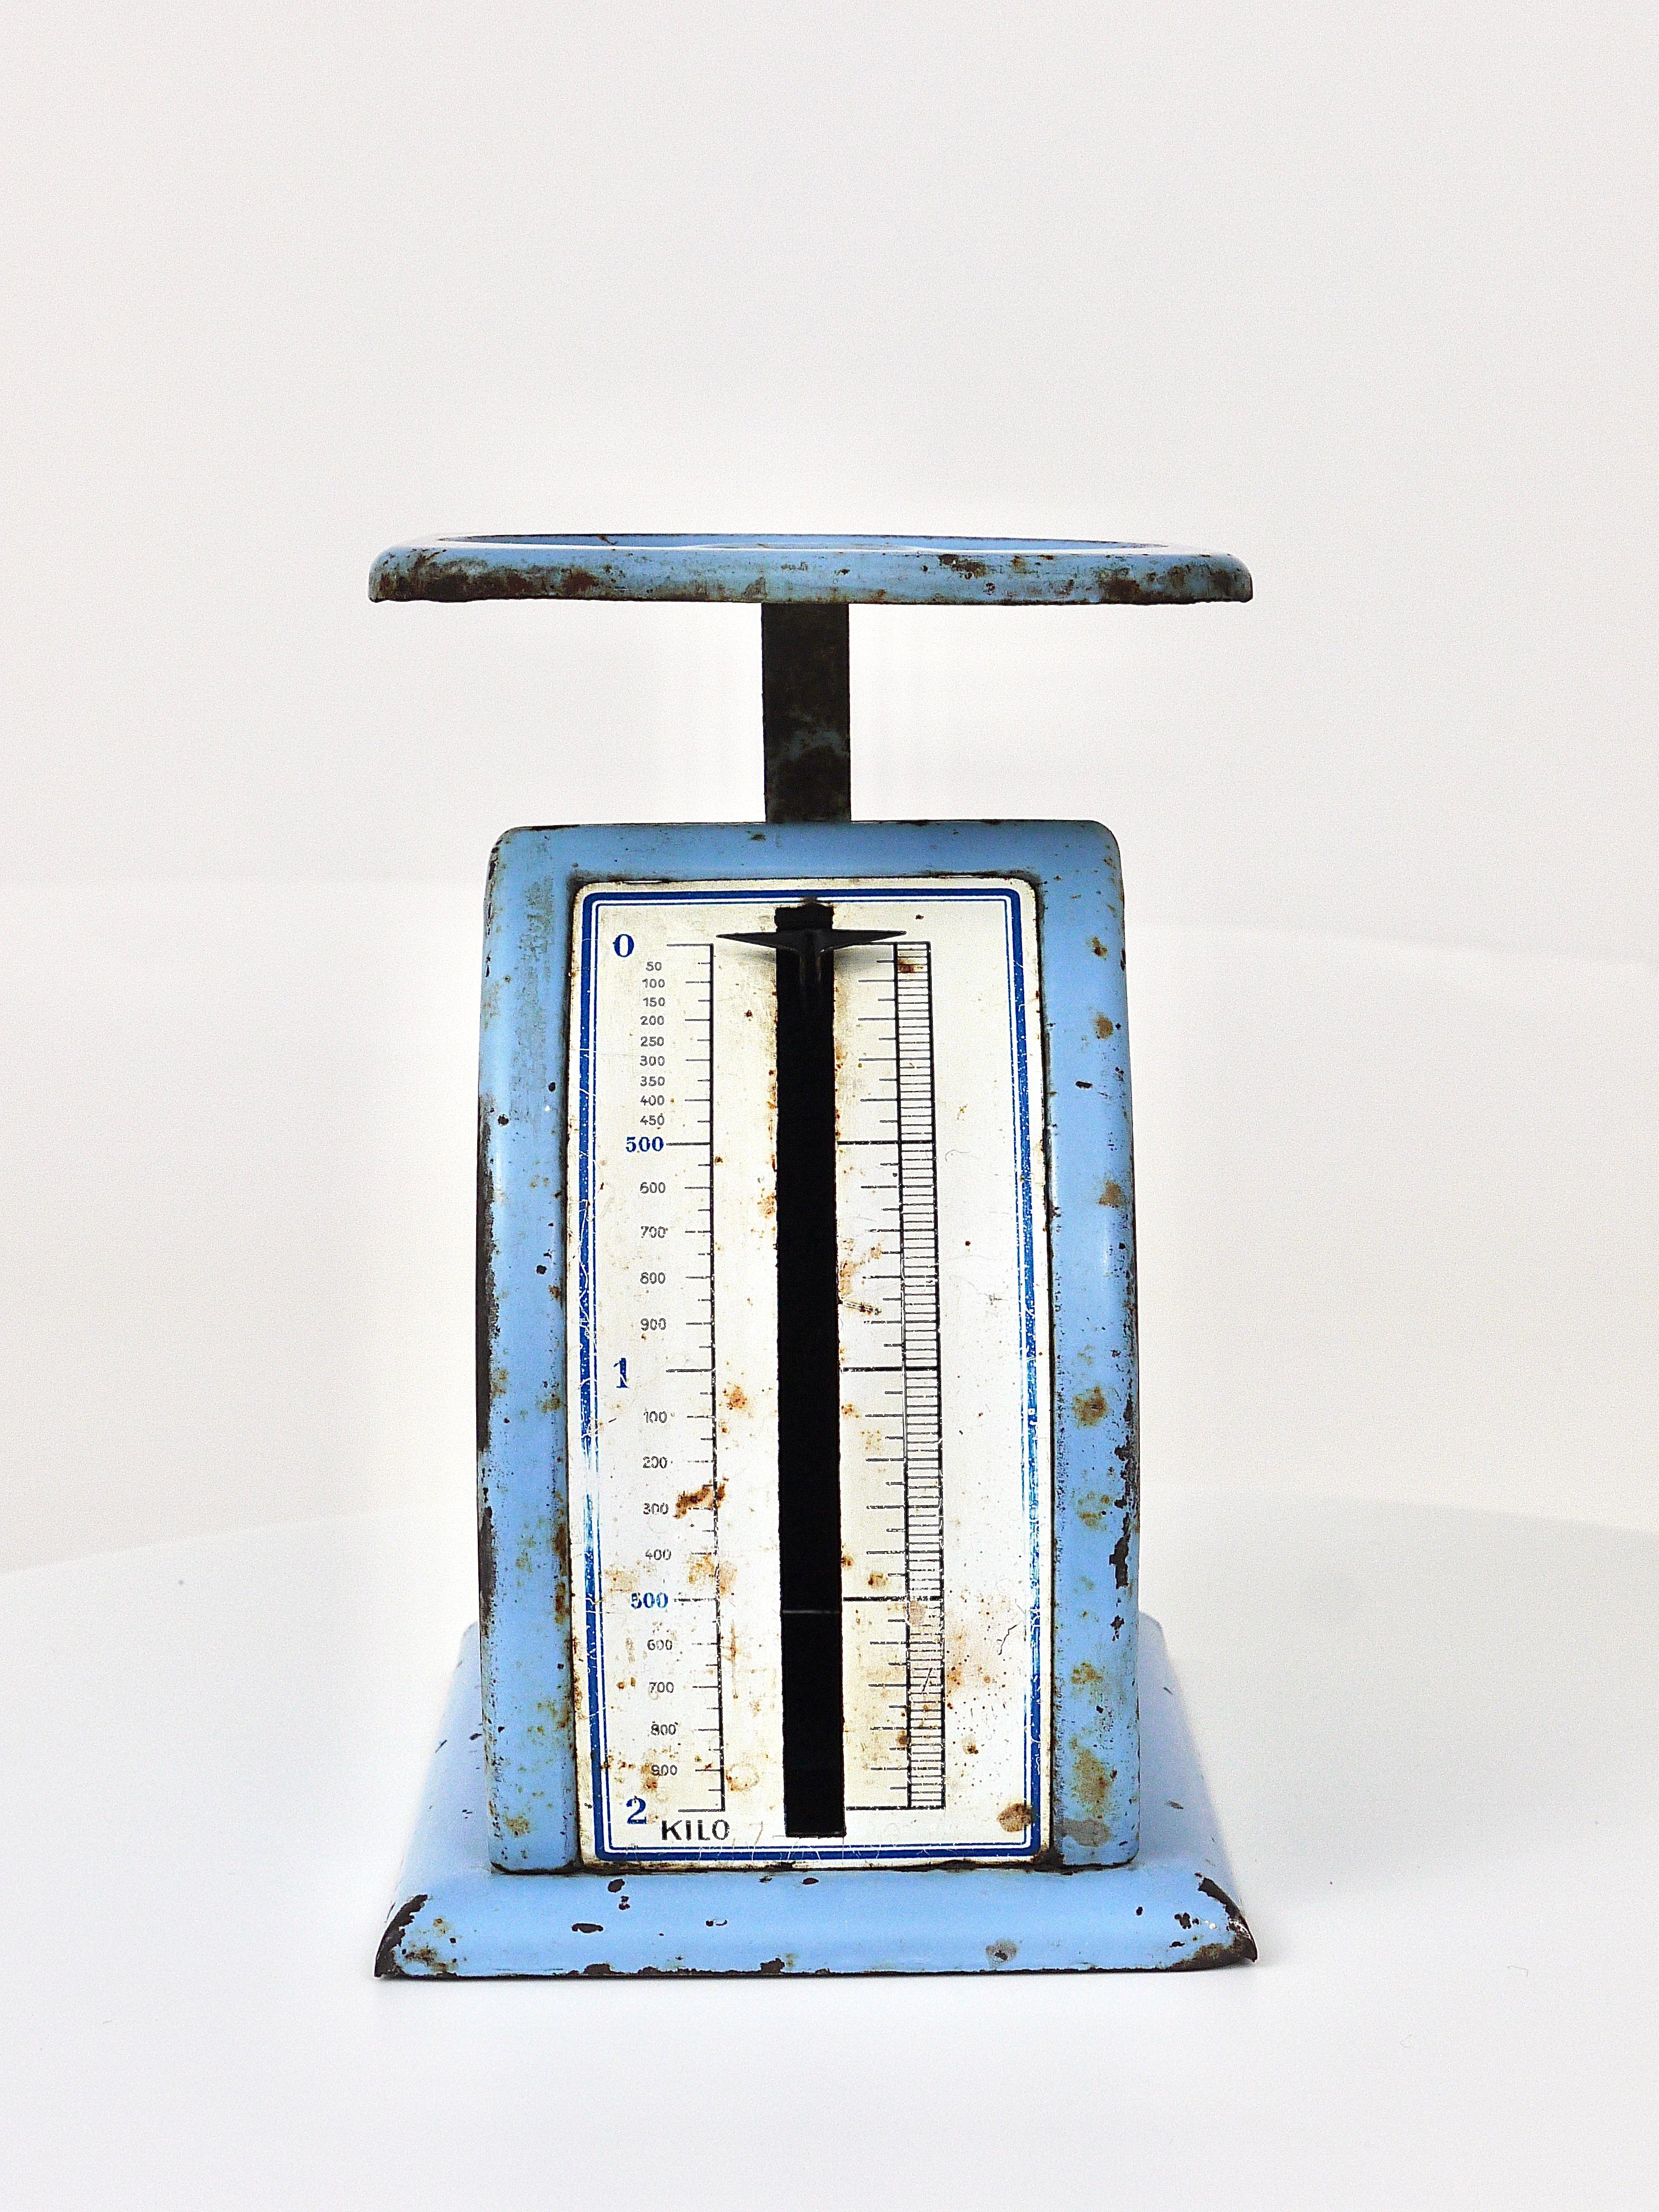 An iconic light-blue sheet metal postal letter scale from the1930s in blue, designed by Marianne Brandt, executed by Ruppel Werke, Ruppelwerk in Gotha, Germany. In original and working condition with charming signs of age.